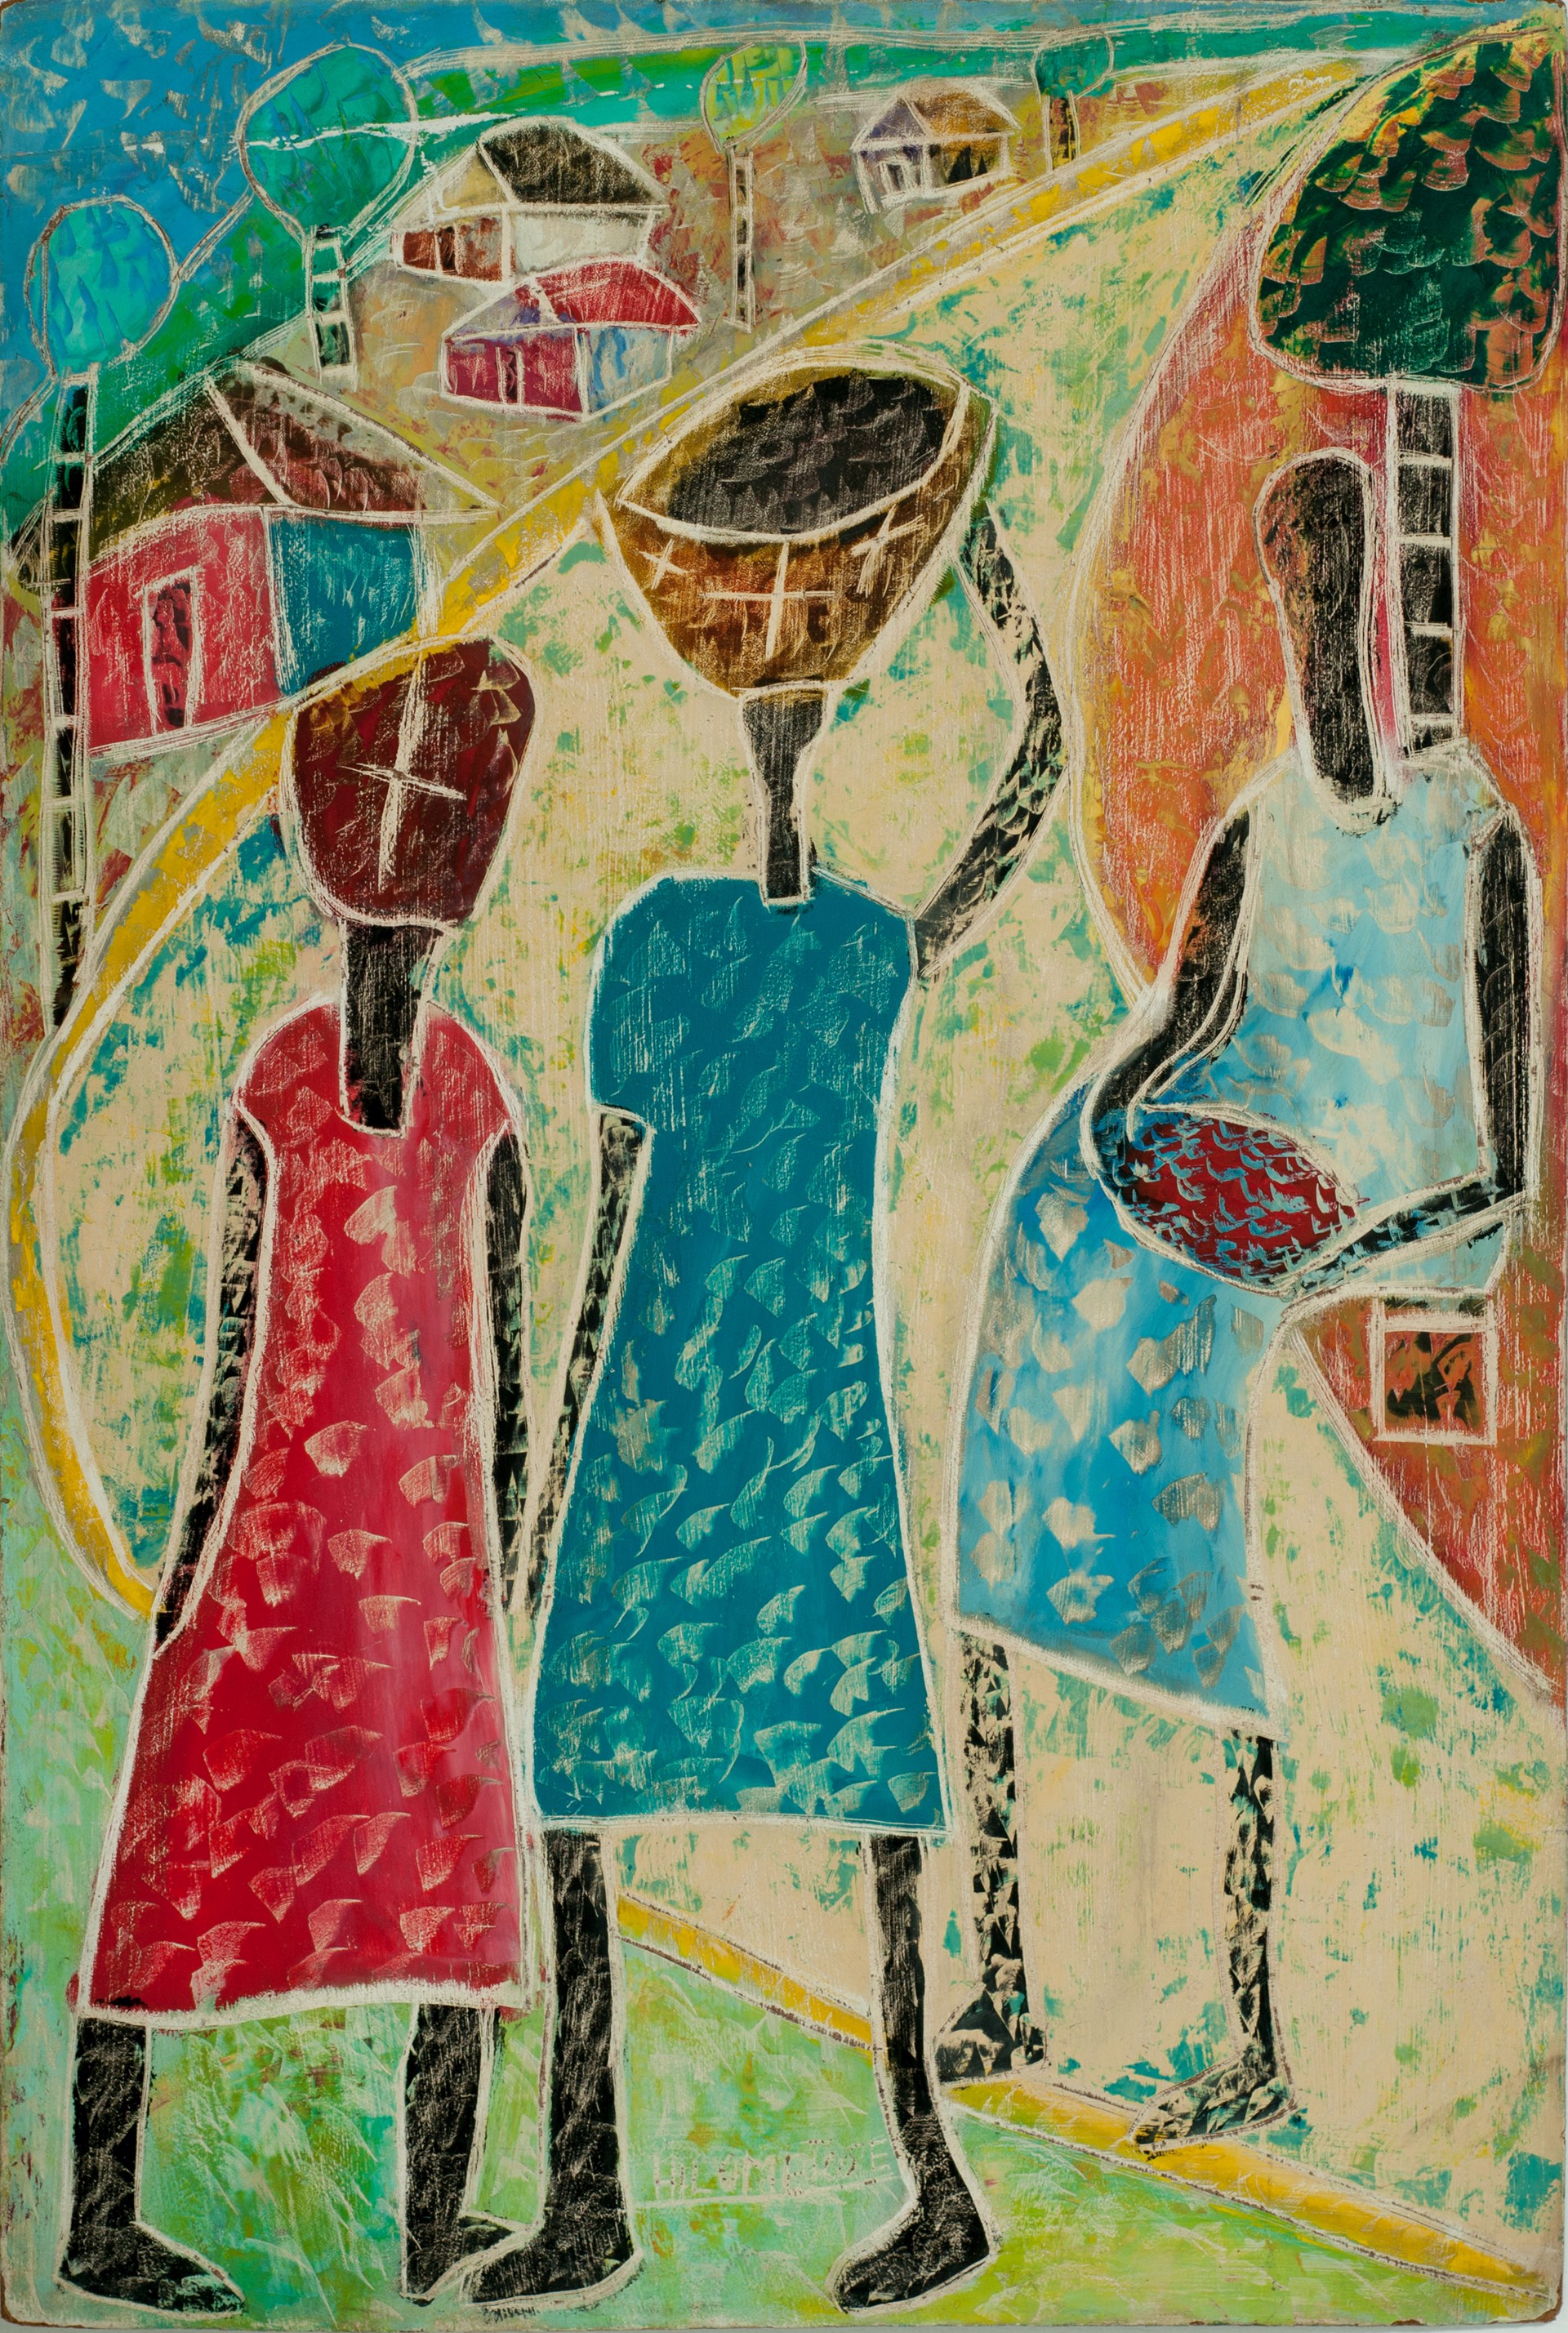 Faceless Sellers #3-10-88GSN by Hilome Jose (Haitian, b.1947)